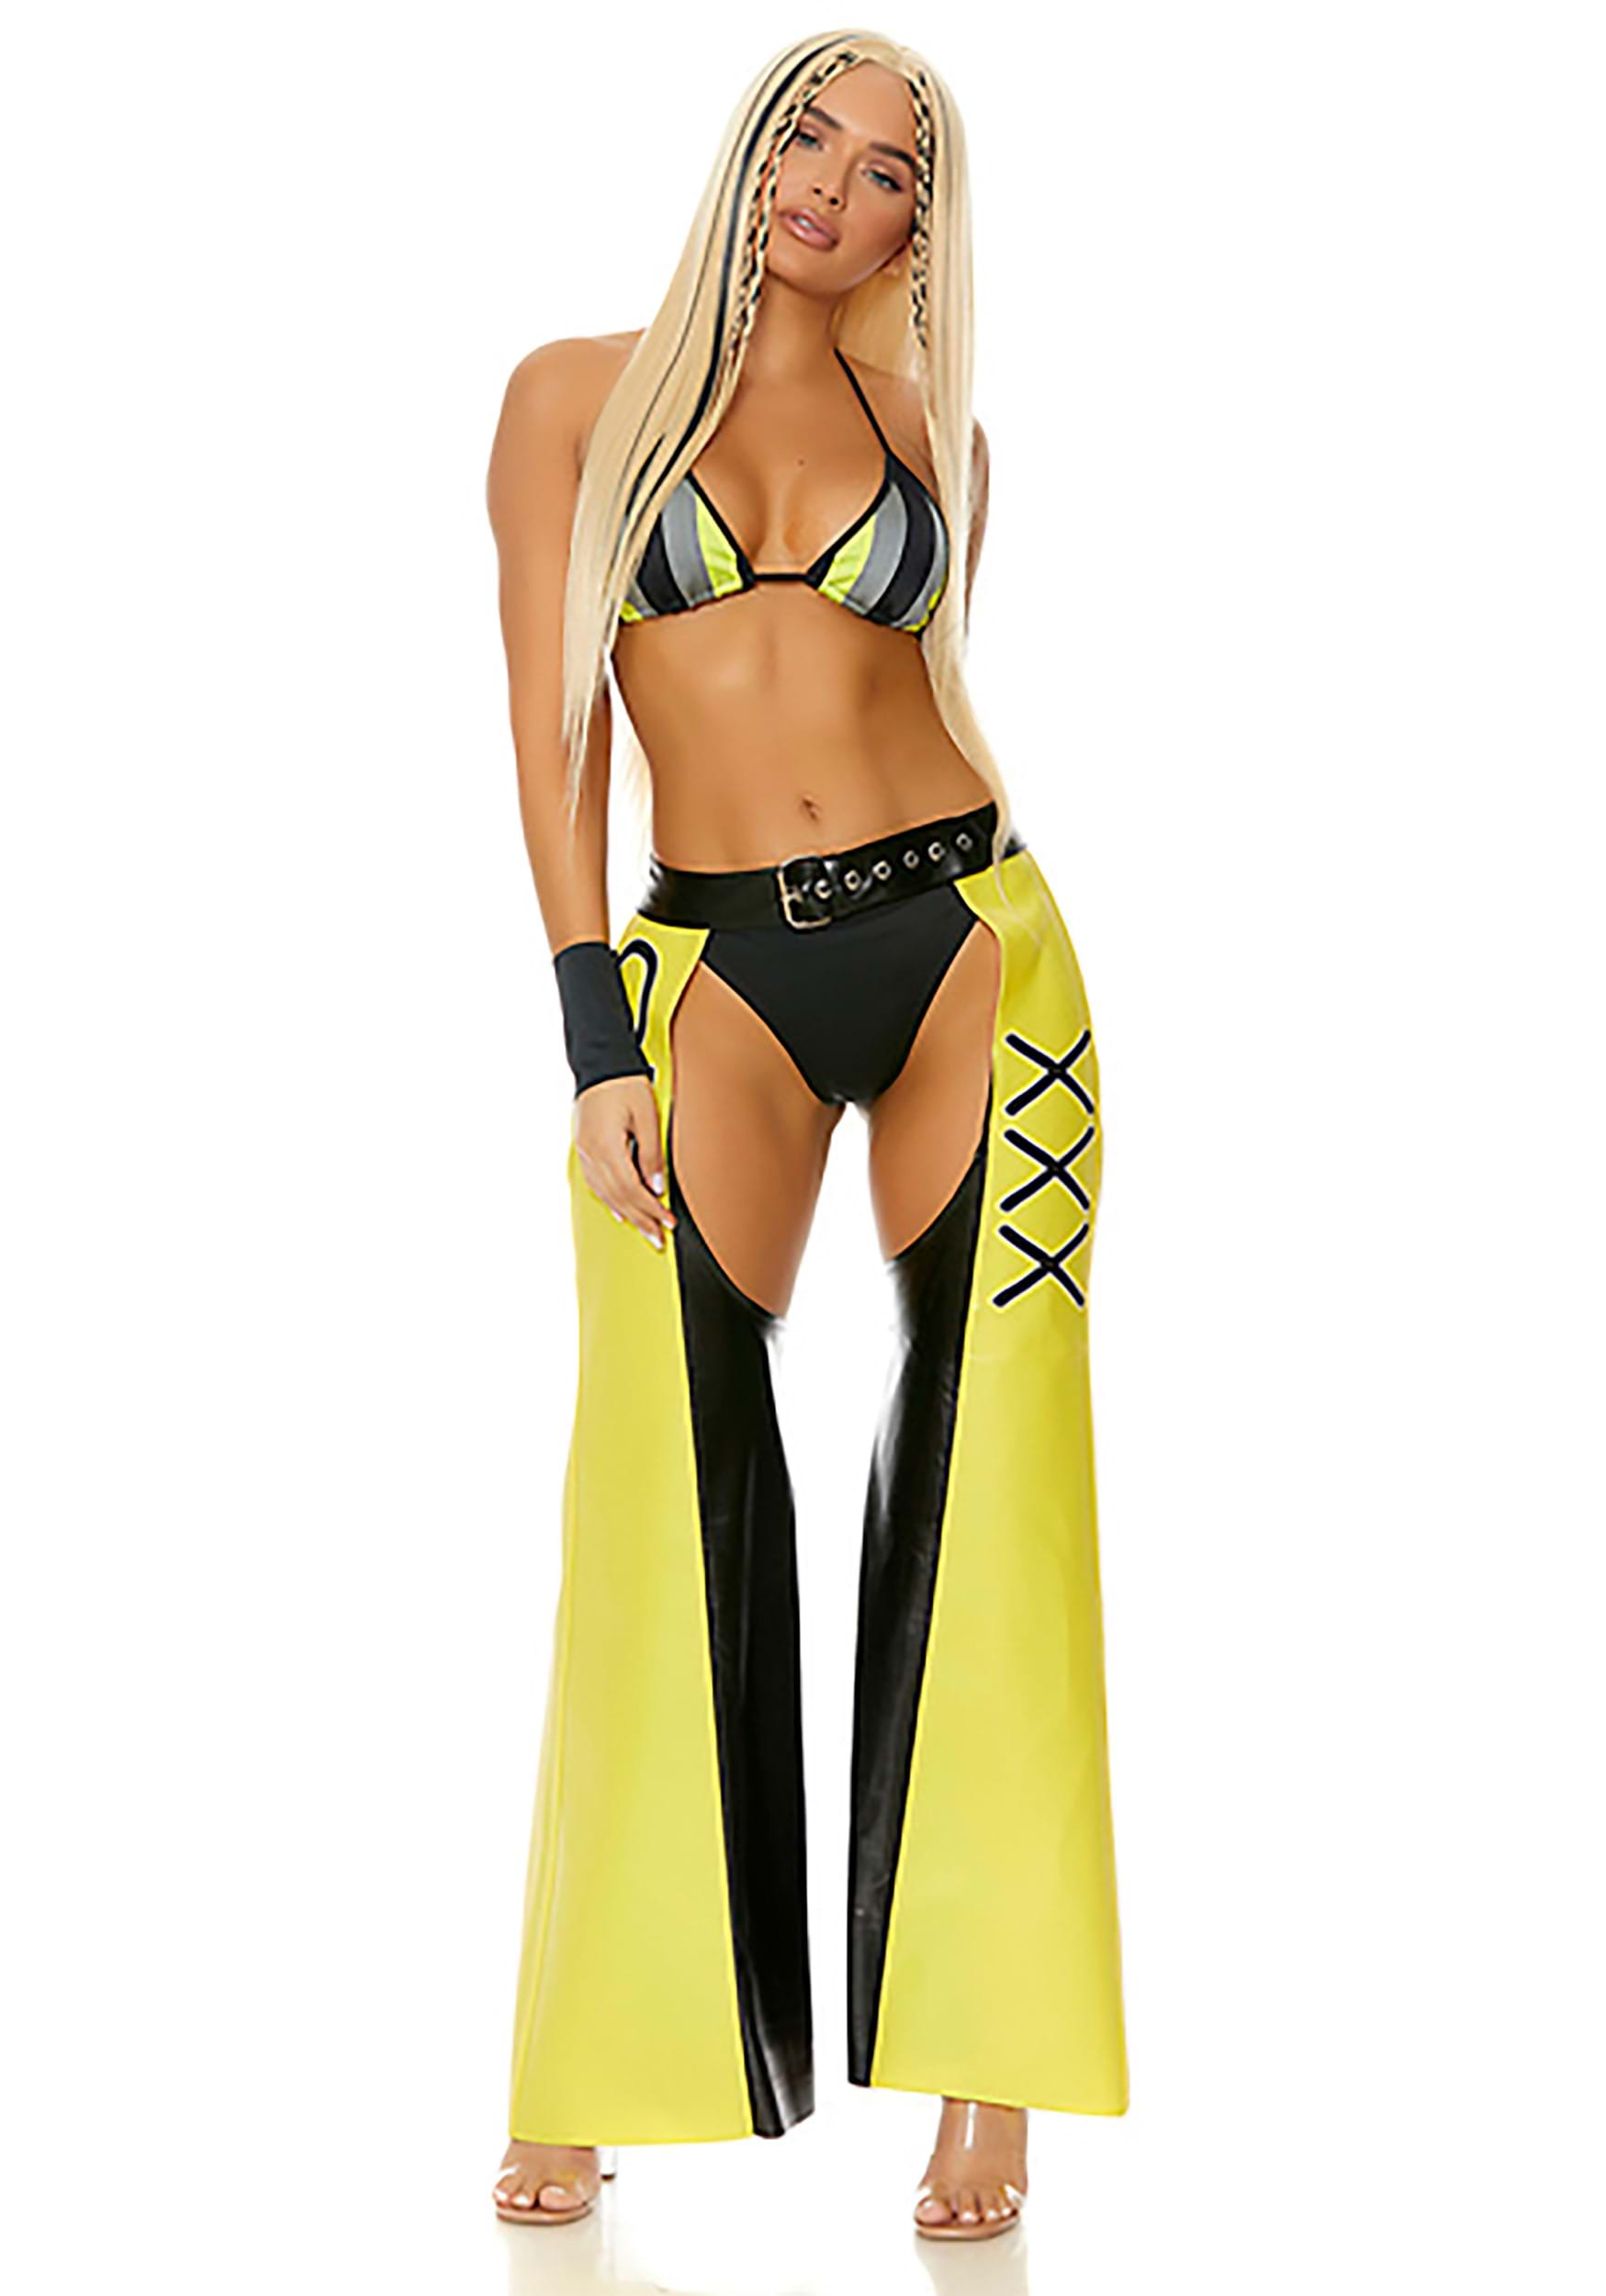 Women's Filthy Sexy Iconic Pop Star Costume